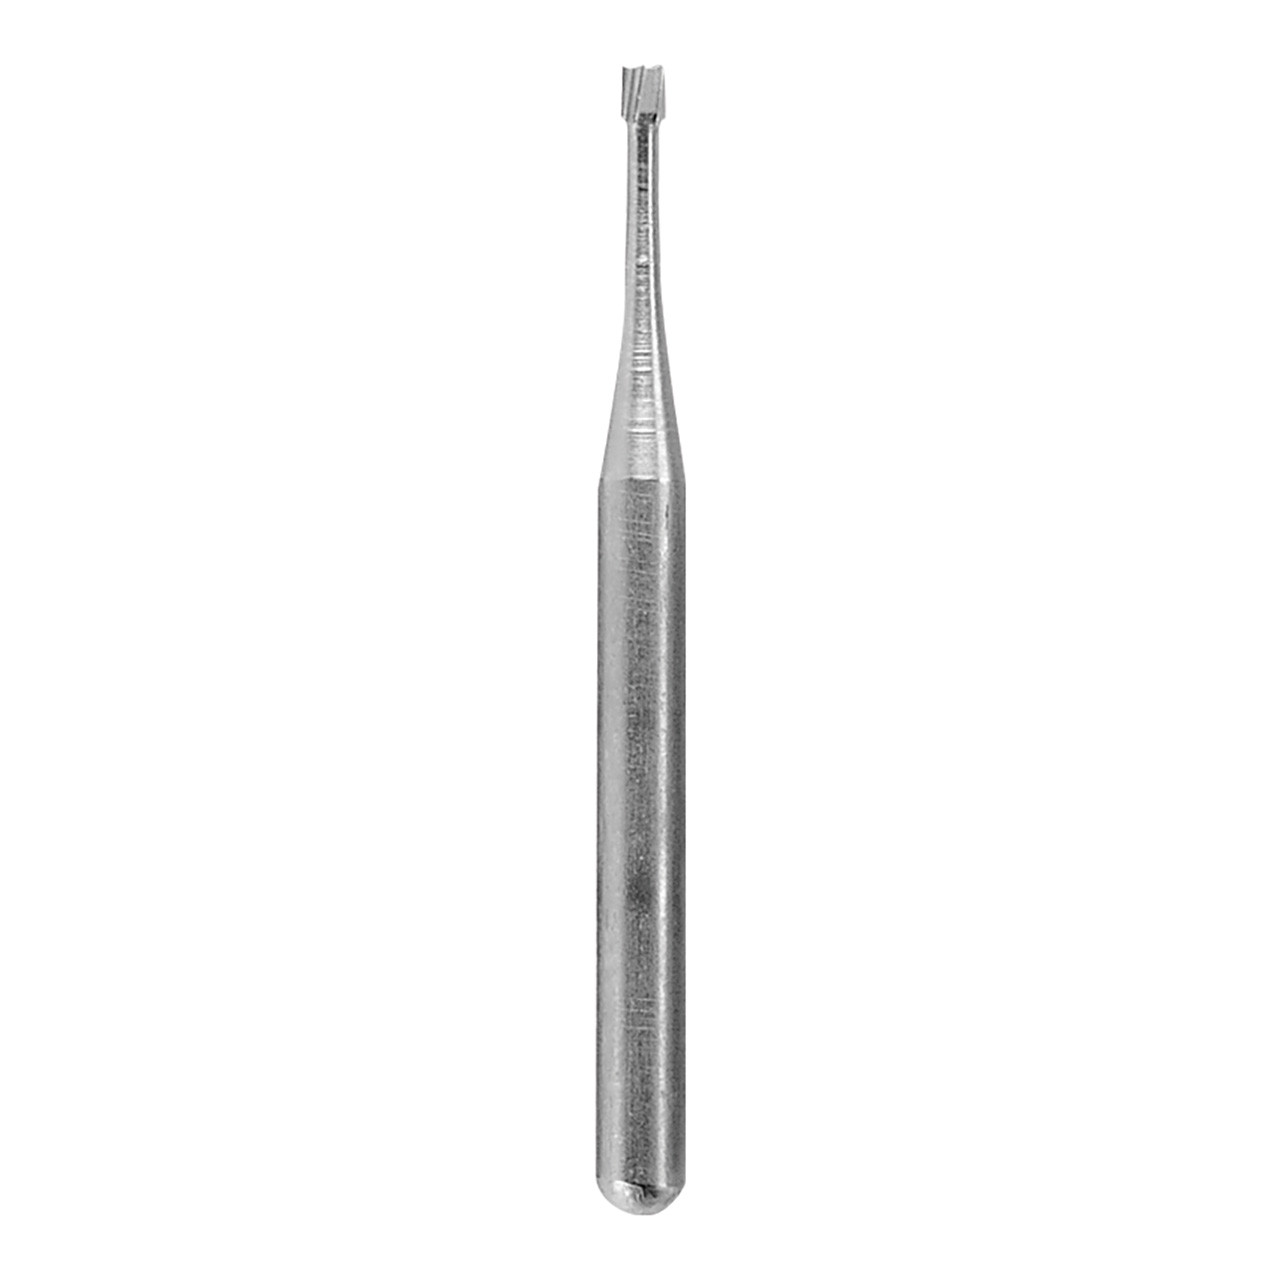 Inverted Cone 1.80mm Carbide Friction Grip Bur 1/16" Shank